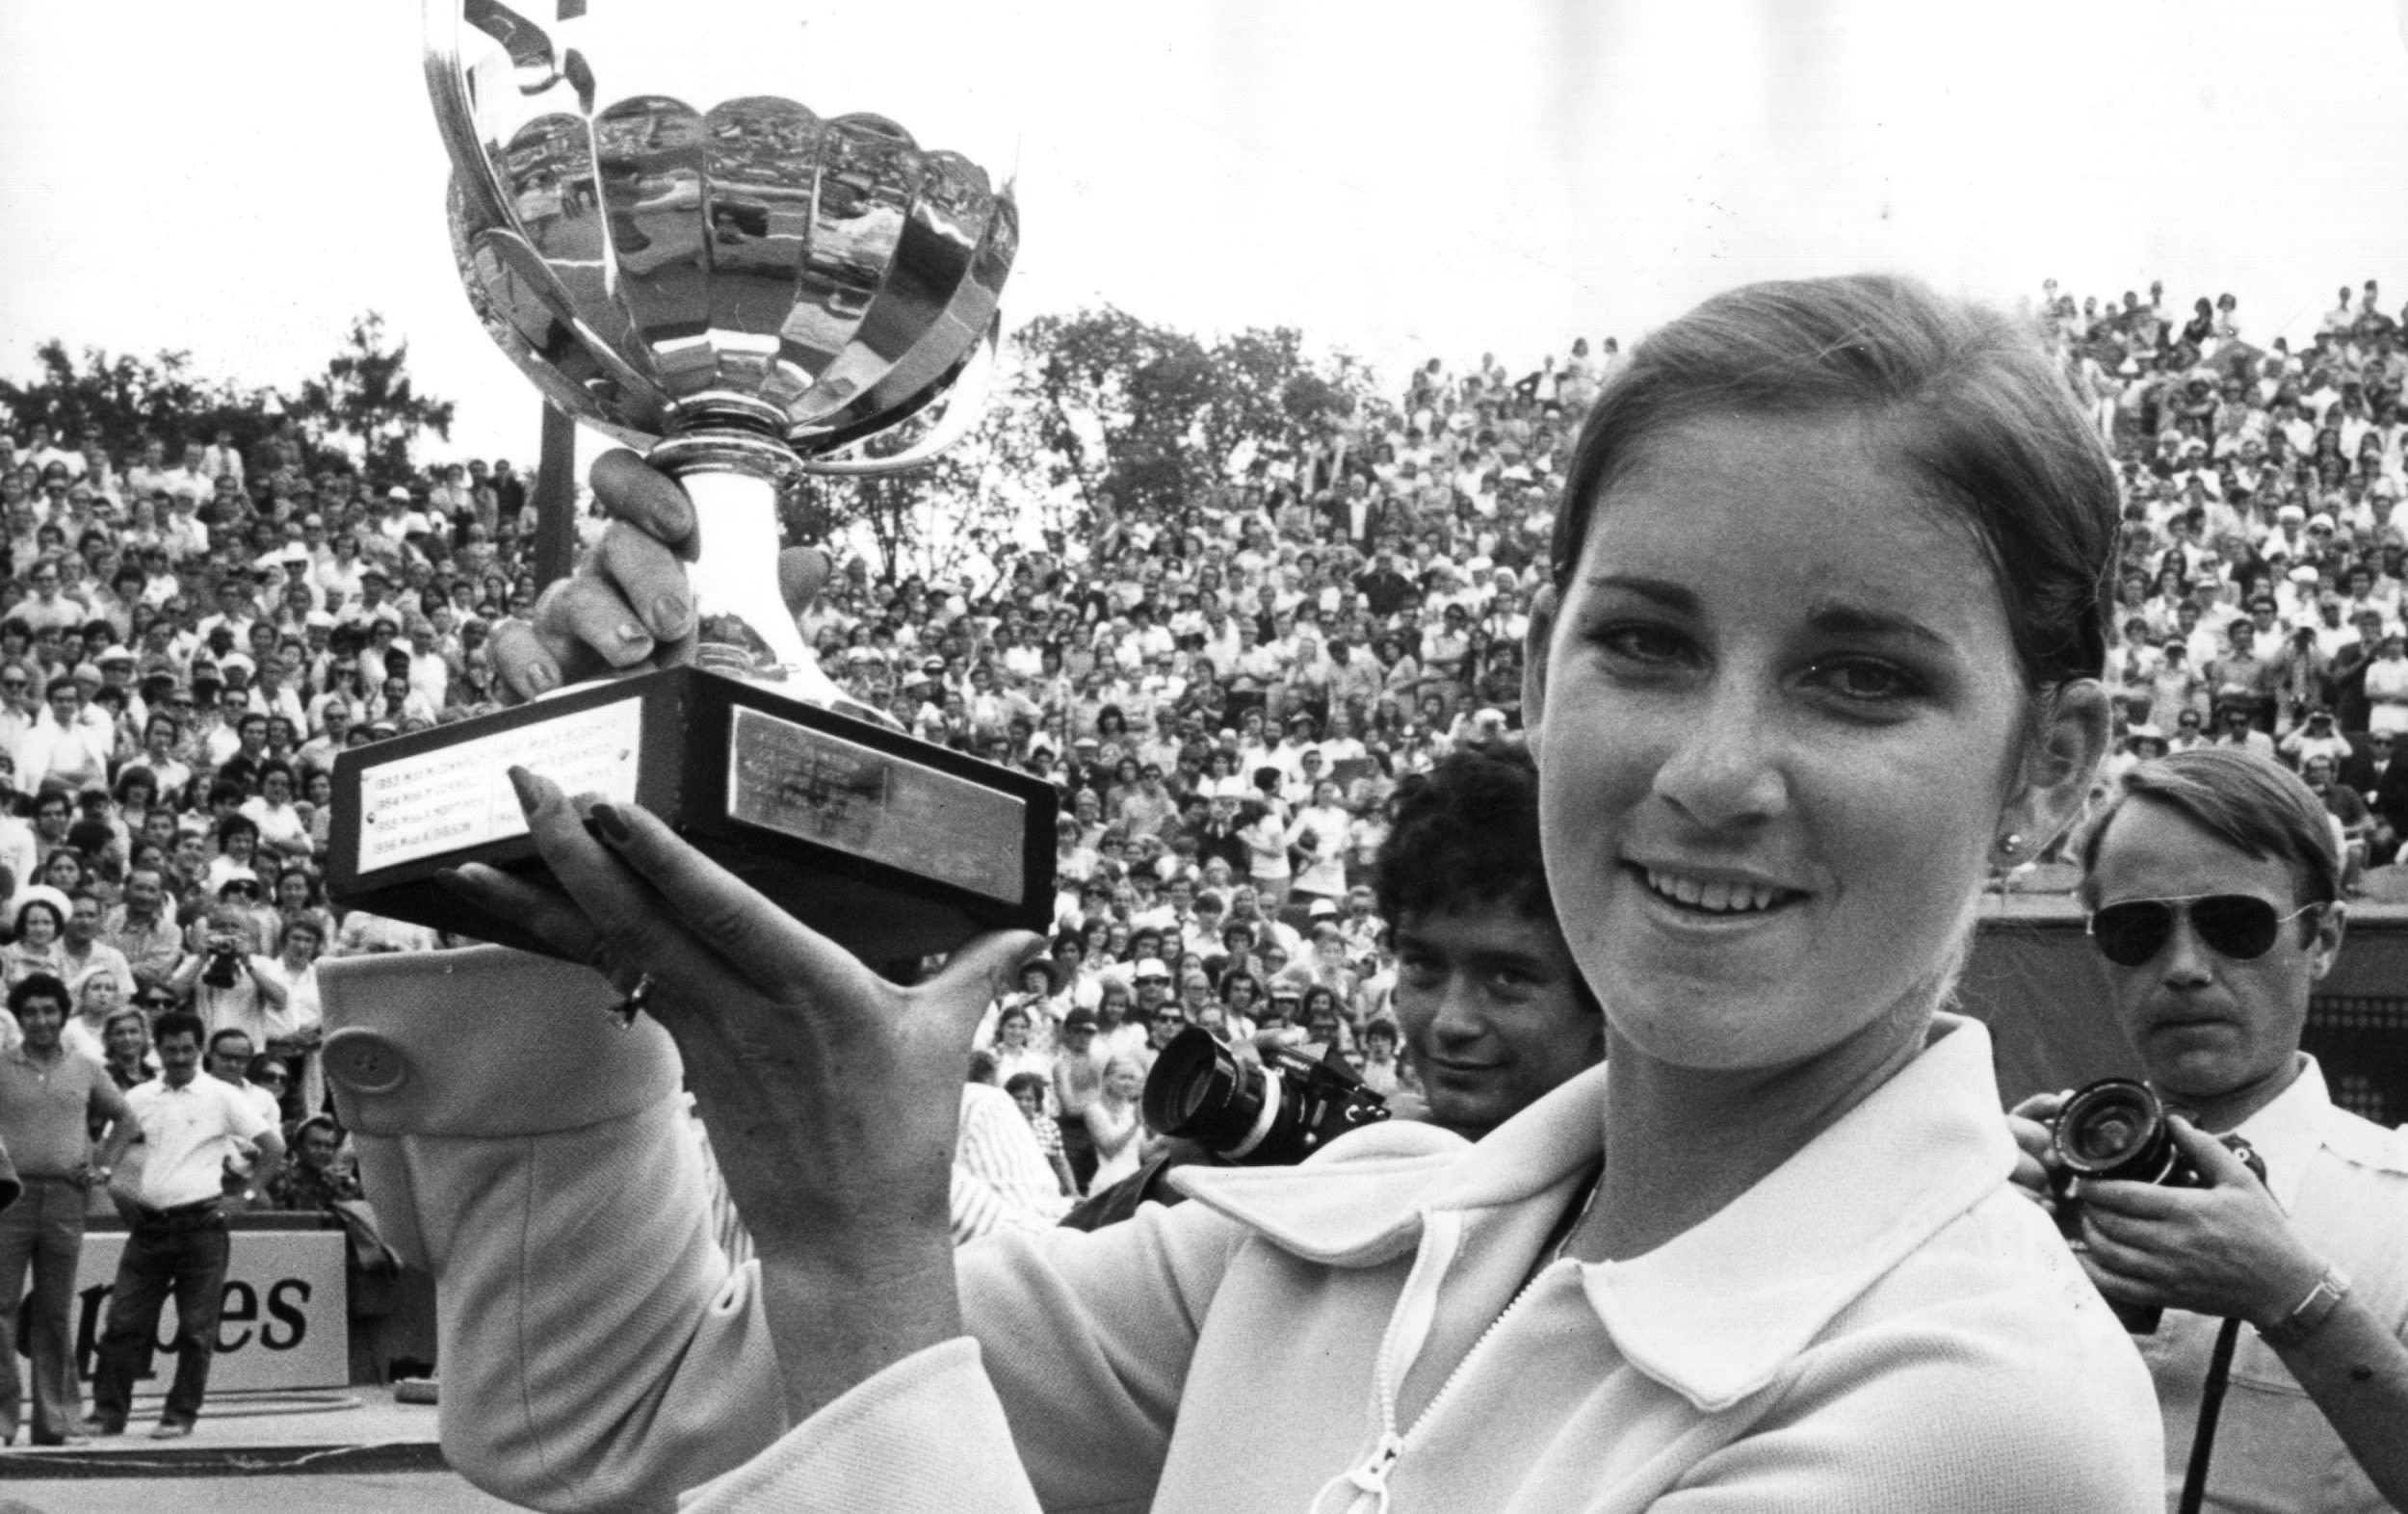 Fifty years since Bjorn Borg and Chris Evert made tennis sexy at French Open